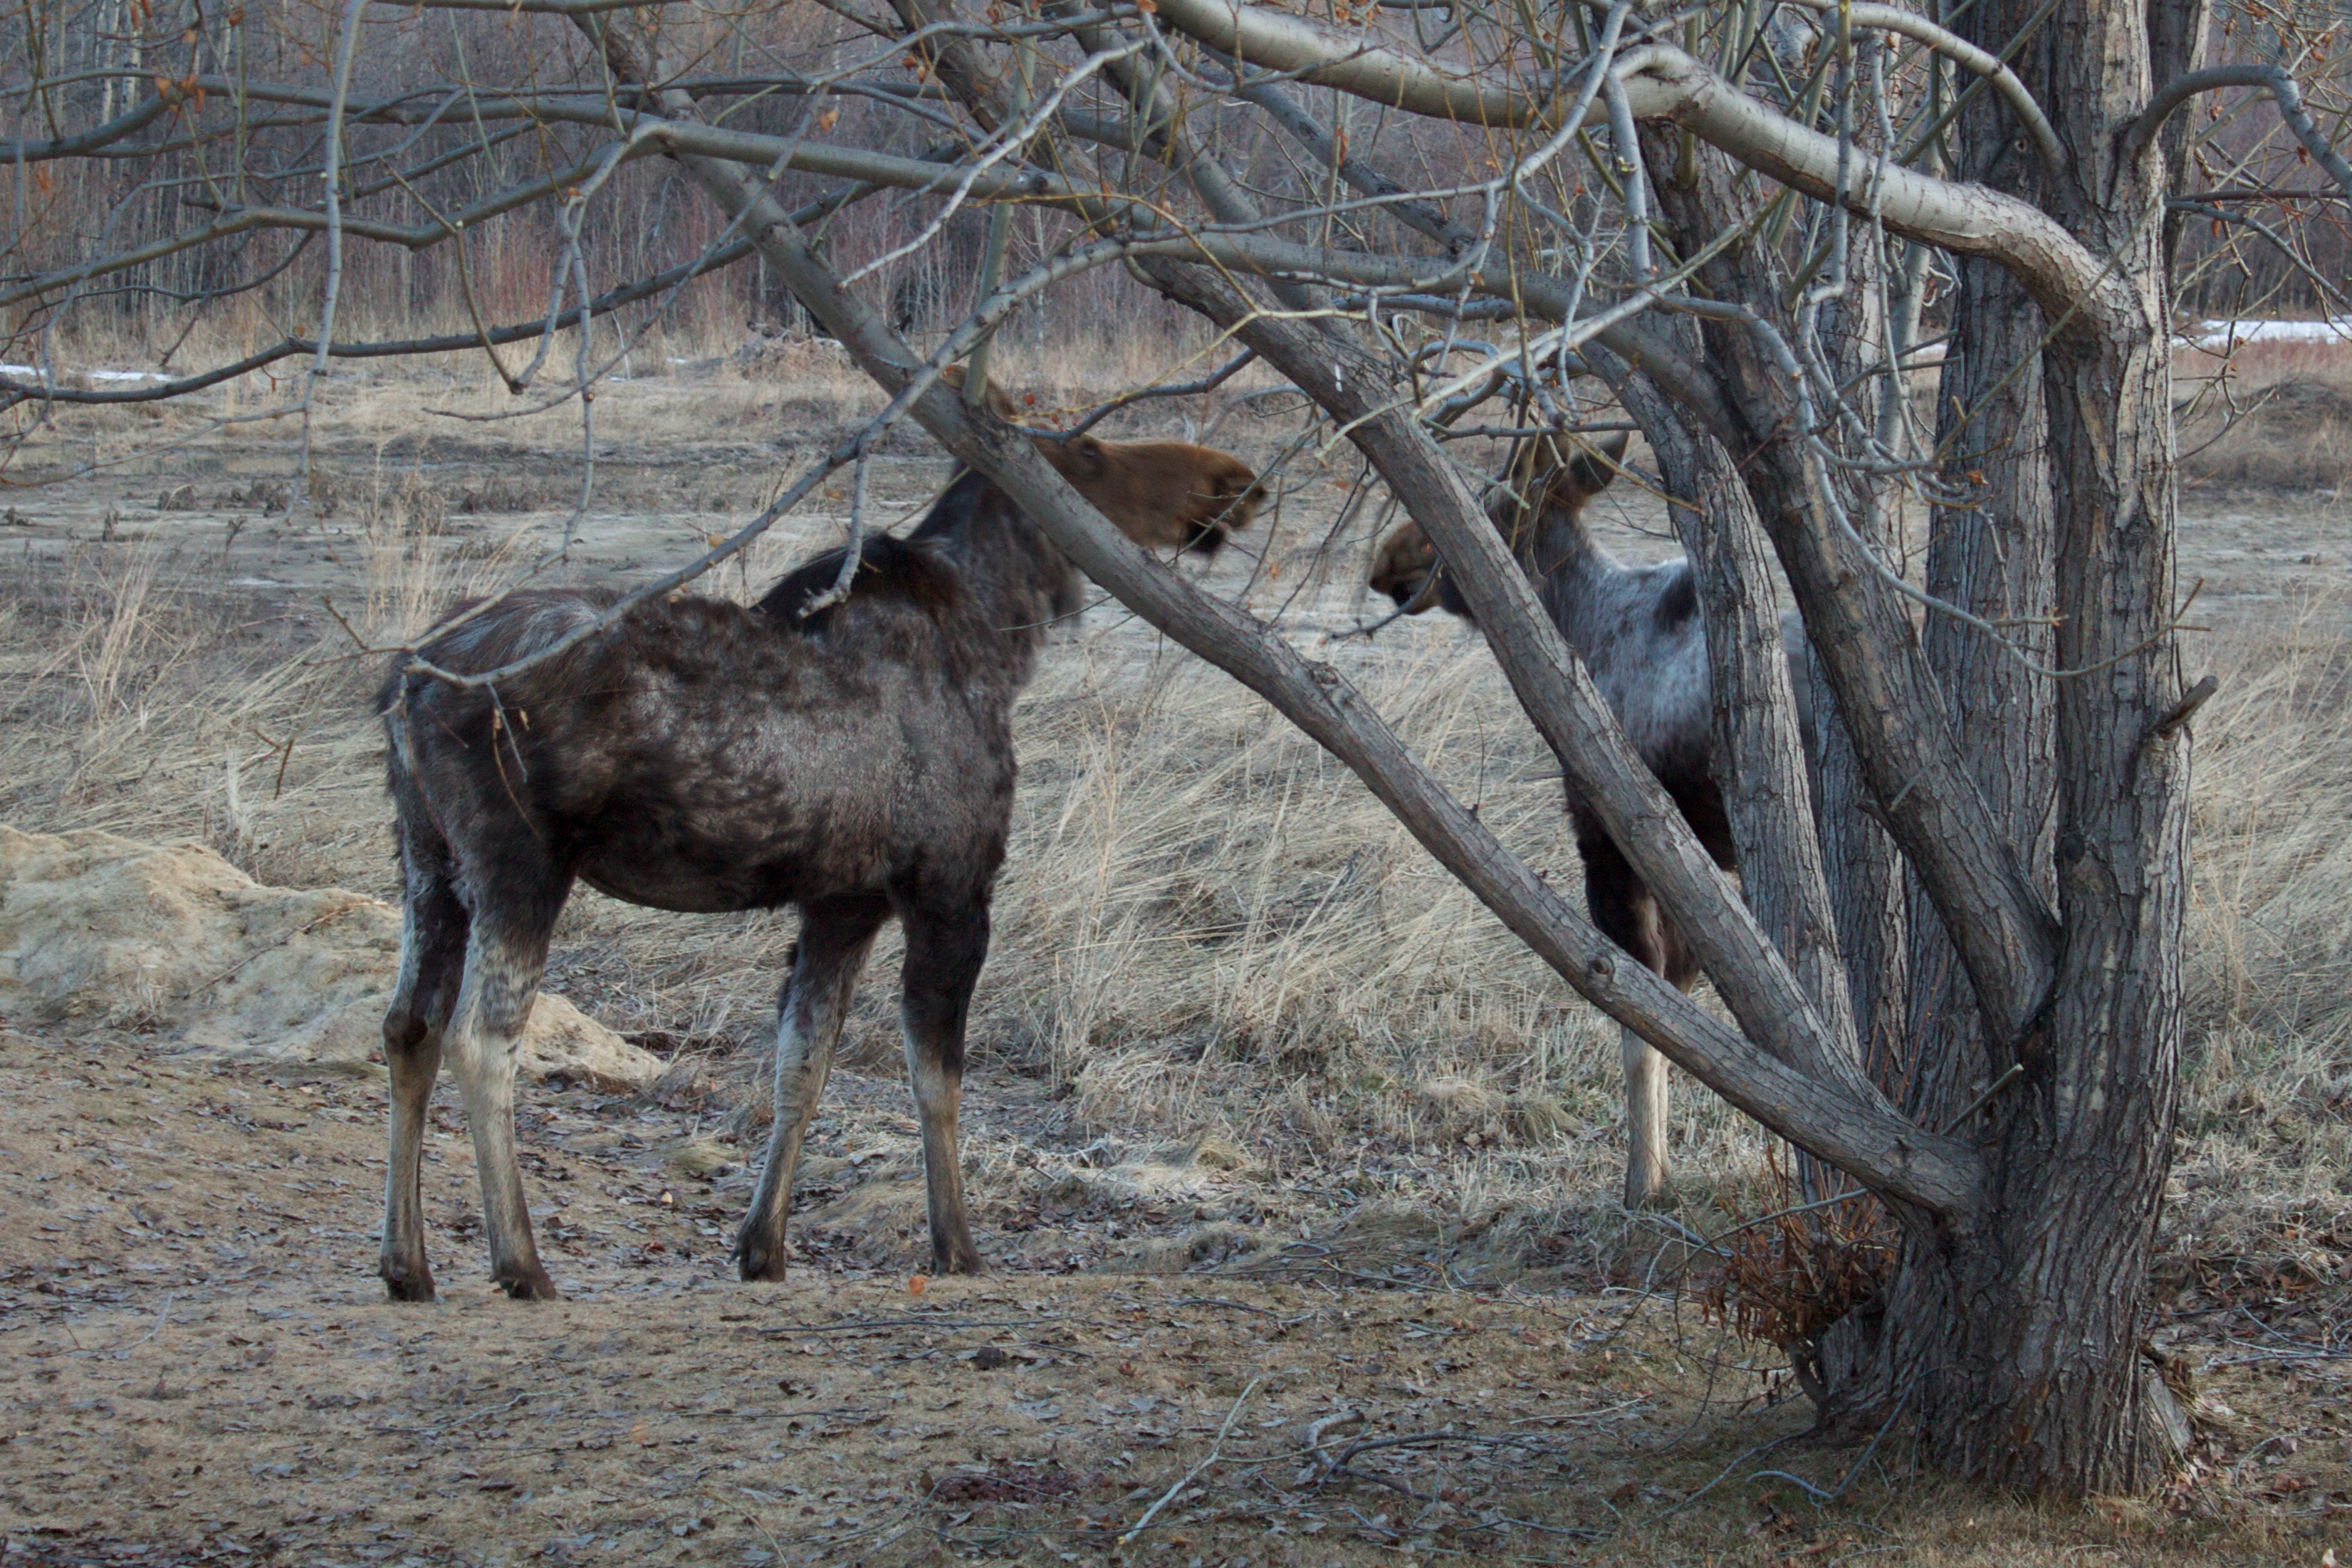 Cow and calf moose showing signs of tick infestation.